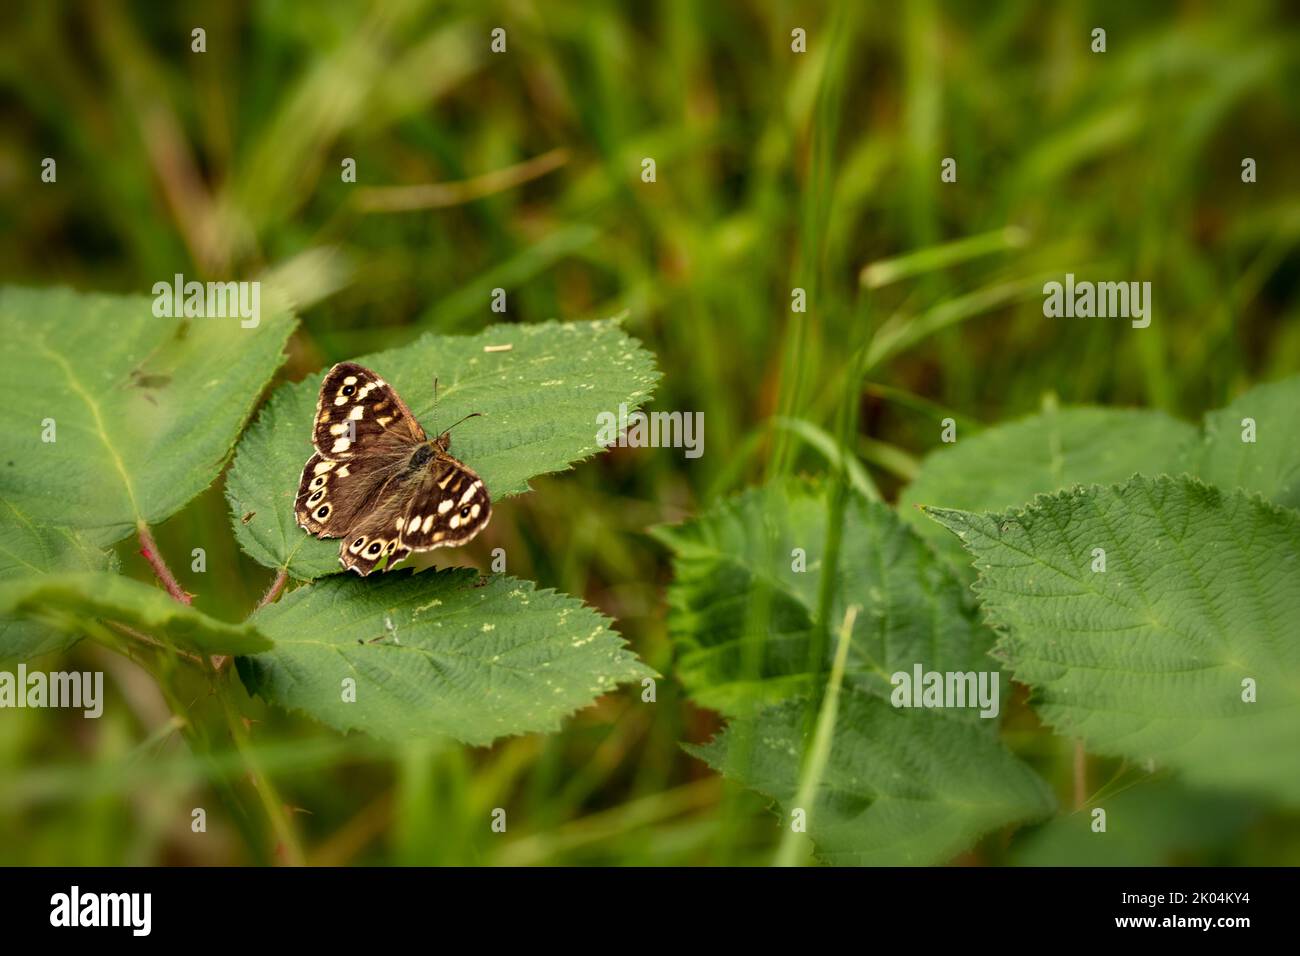 Glorious butterfly on bramble leaf, natural close-up wildlife portrait Stock Photo